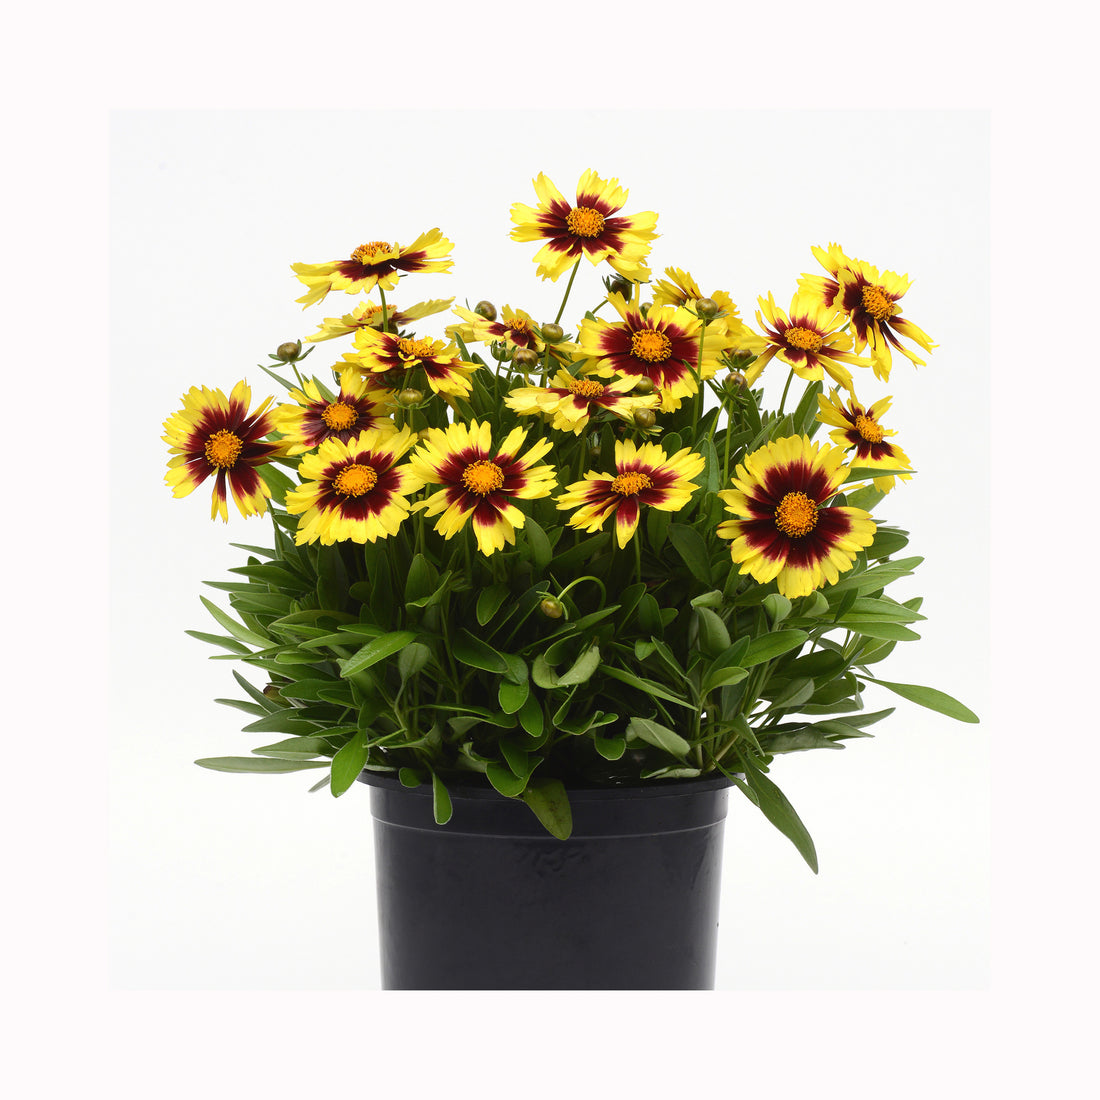 Coreopsis UpTick Yellow and Red